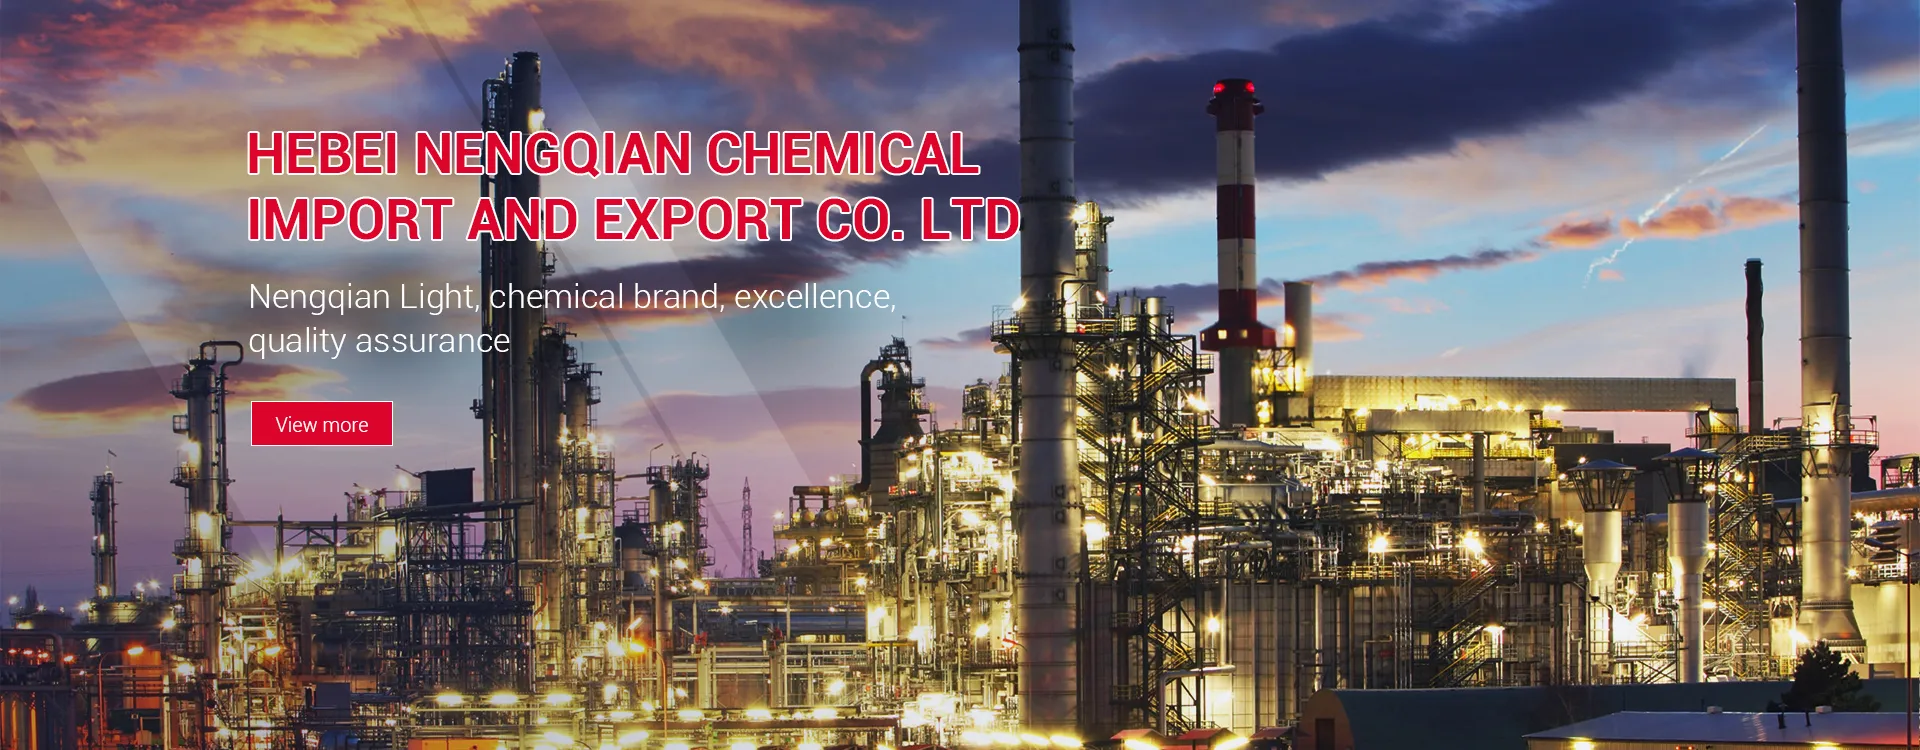 Hebei Nengqian Chemical Import And Export Co., Ltd.